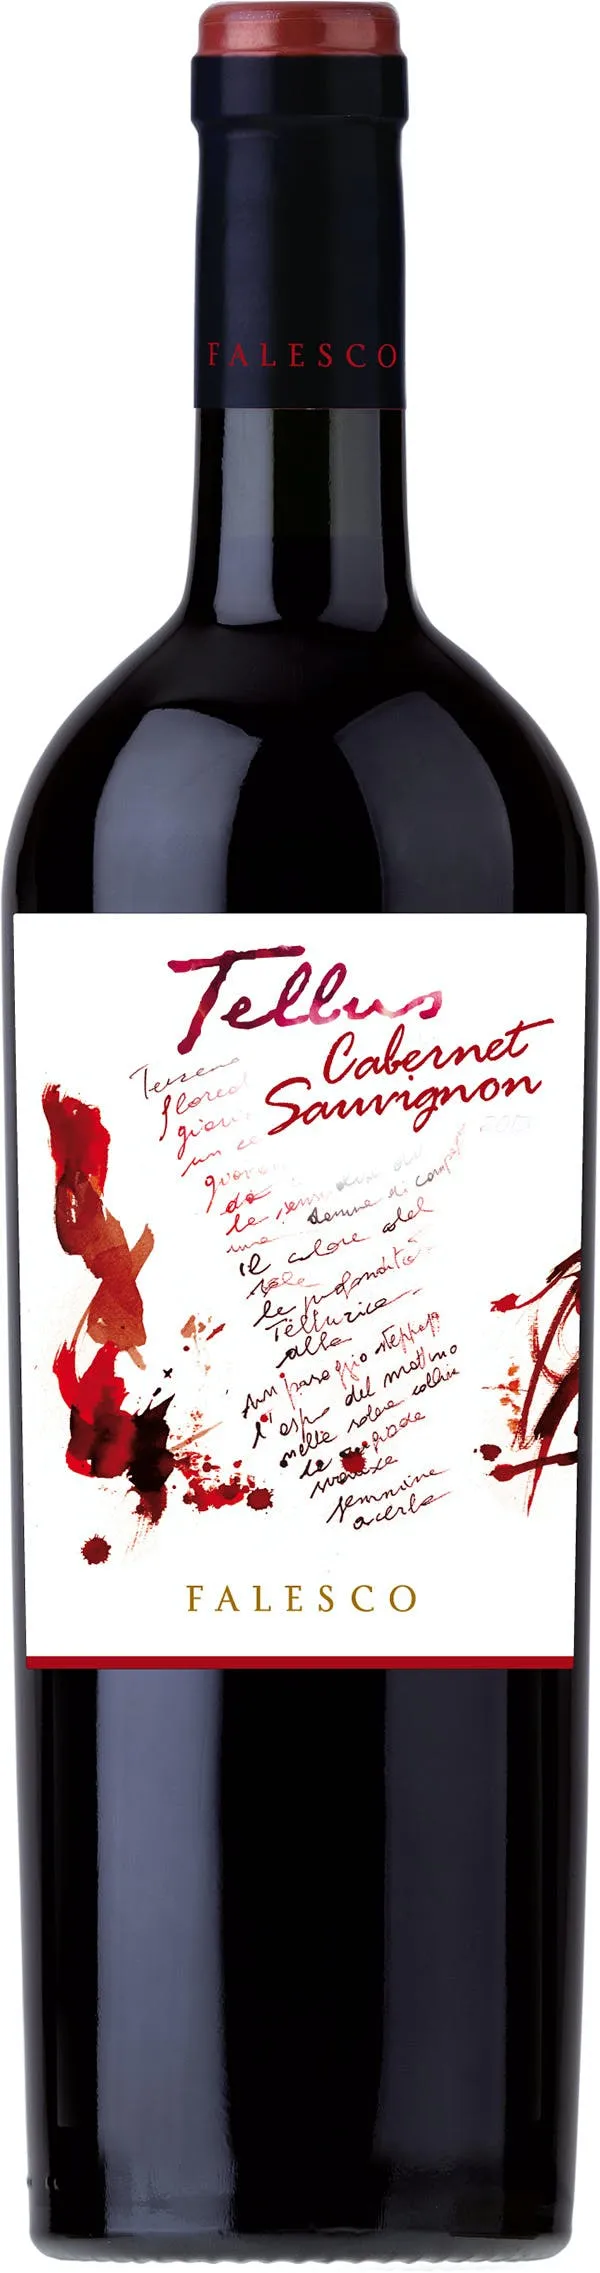 Bottle of Falesco Tellus Cabernet Sauvignon from search results